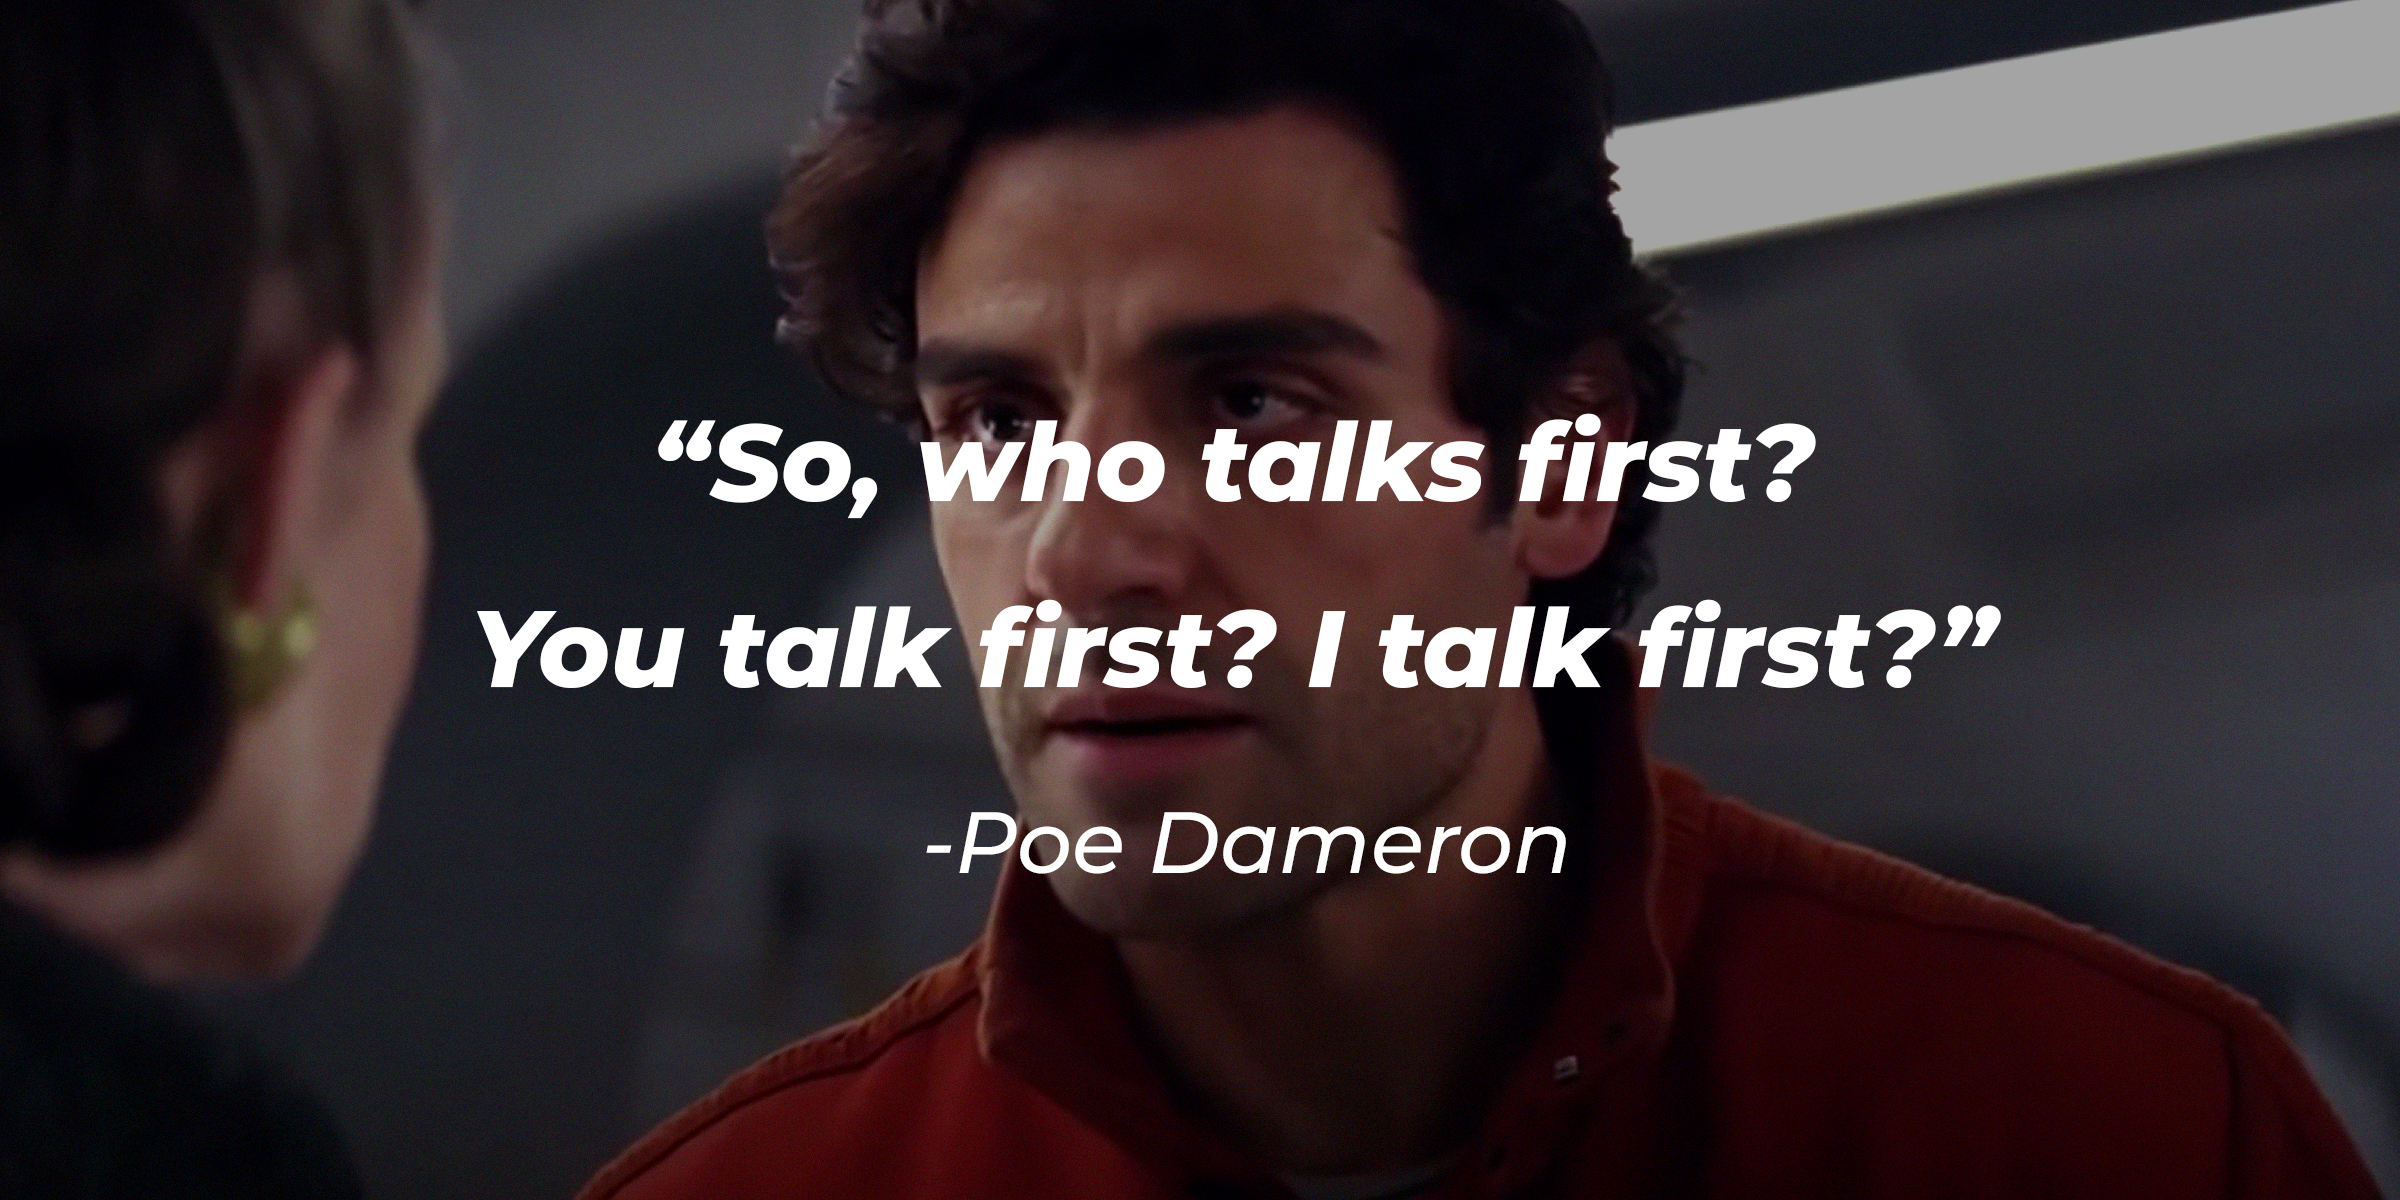 Poe Dameron, with his quote: "So, who talks first? You talk first? I talk first?" | Source: facebook.com/StarWars